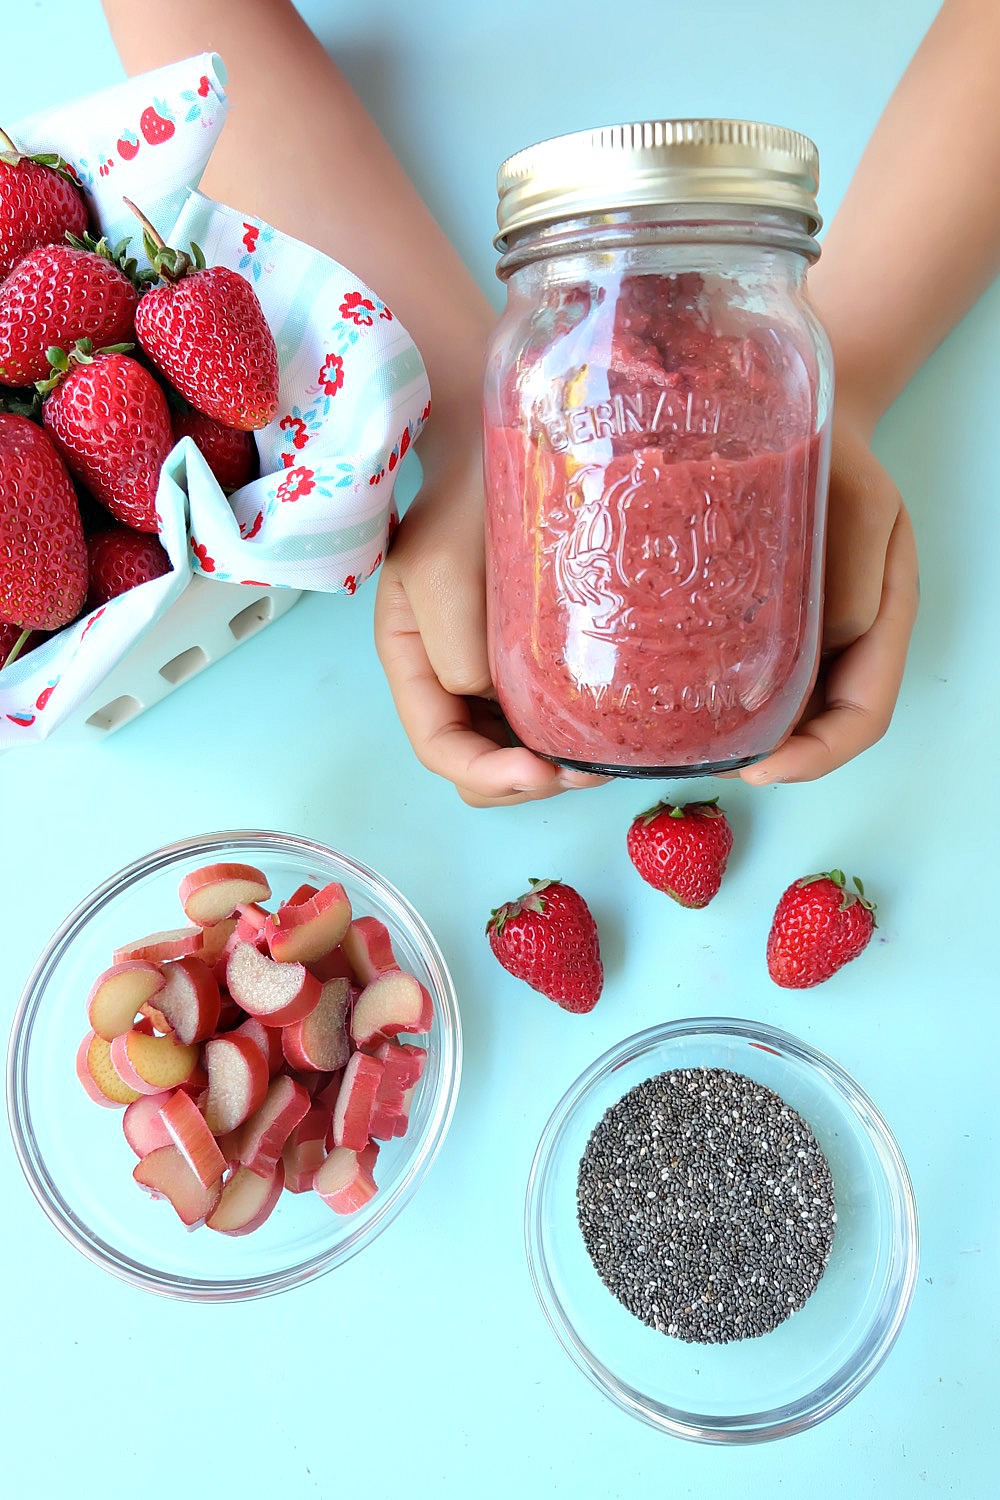 All the flavors of summer in one easy jam! This 15 minute strawberry rhubarb chia jam recipe takes two of my favorite flavors of summer and turns it into one healthy recipe! If you have never made jam before this is the recipe to start with. It uses chia seeds to thicken the jam instead of pectin. Family friendly, get the kids involved in the kitchen helping to make this delicious treat. Perfect for on bread, mixed with greek yogurt or as an ice cream topper! #Jam #chia #strawberry #rhubarb #recipe